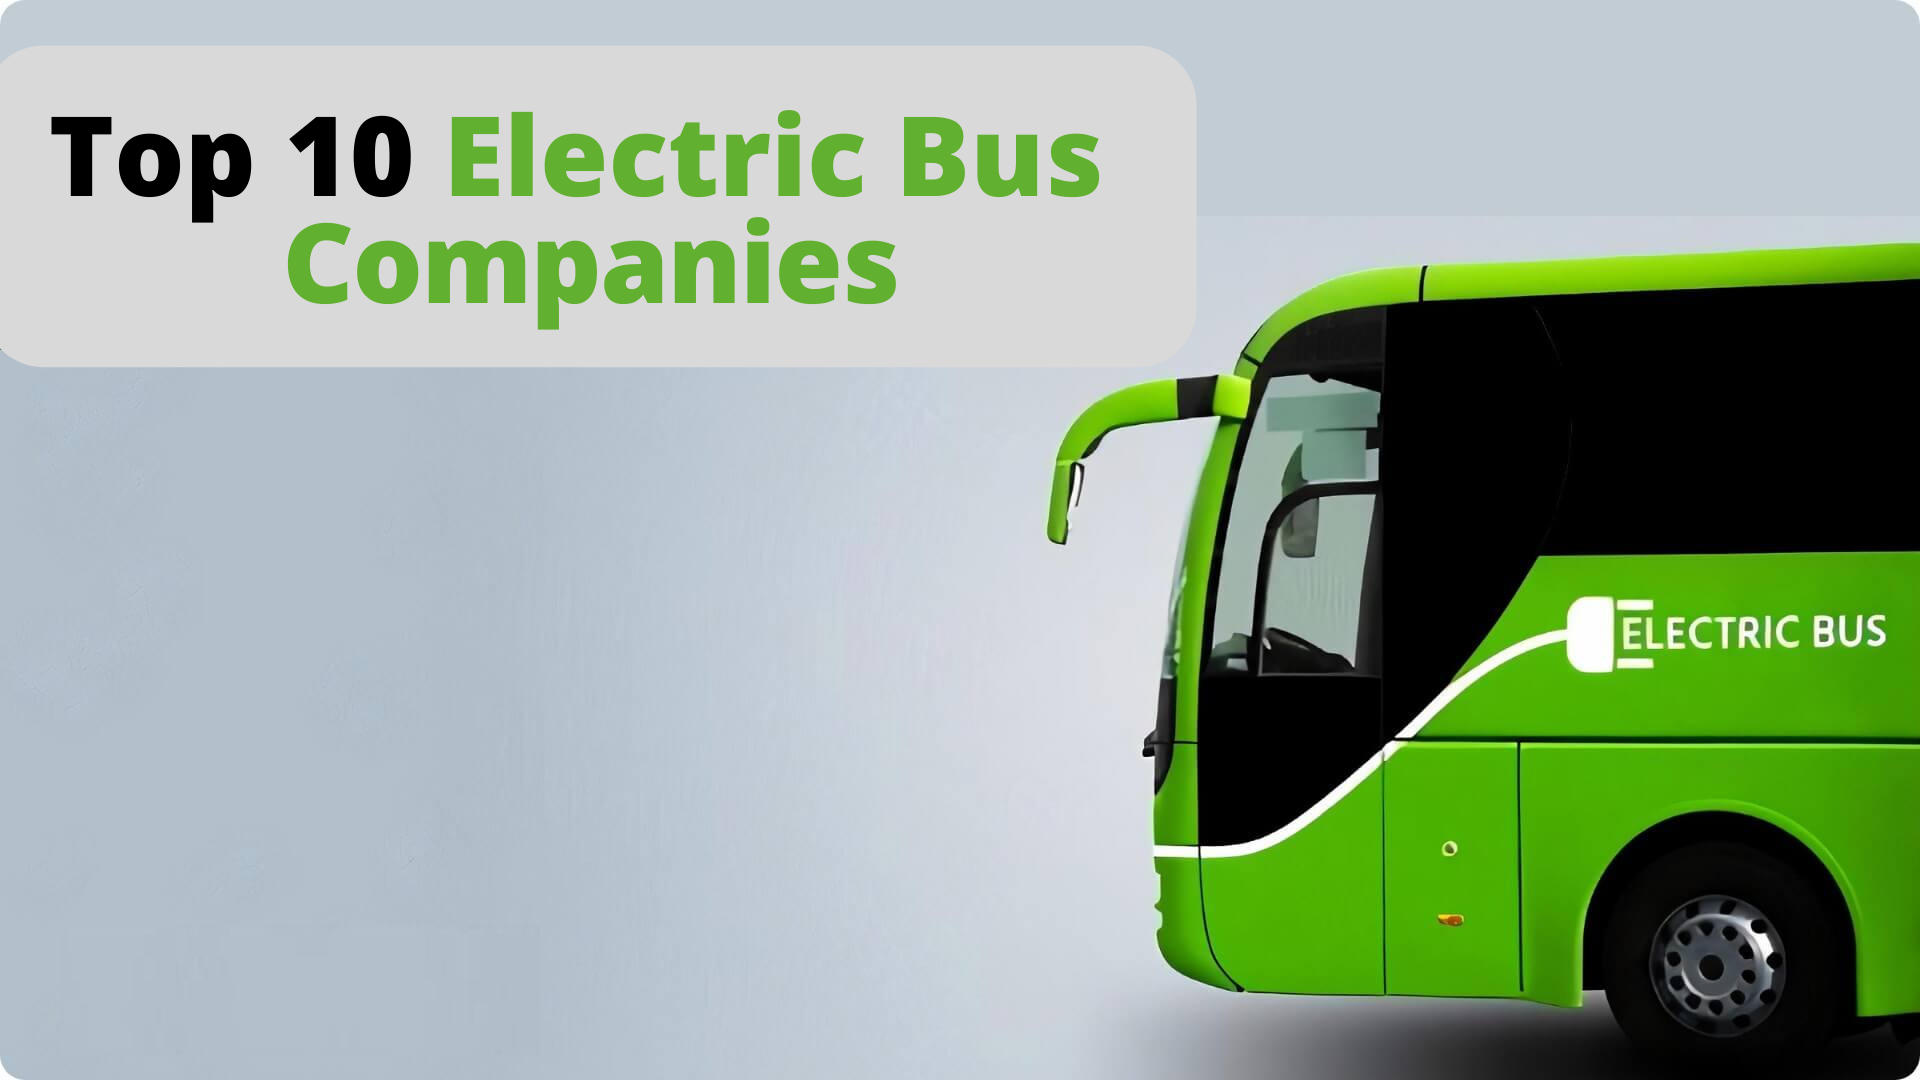 Top 10 Electric Bus Companies In India | Electric Bus